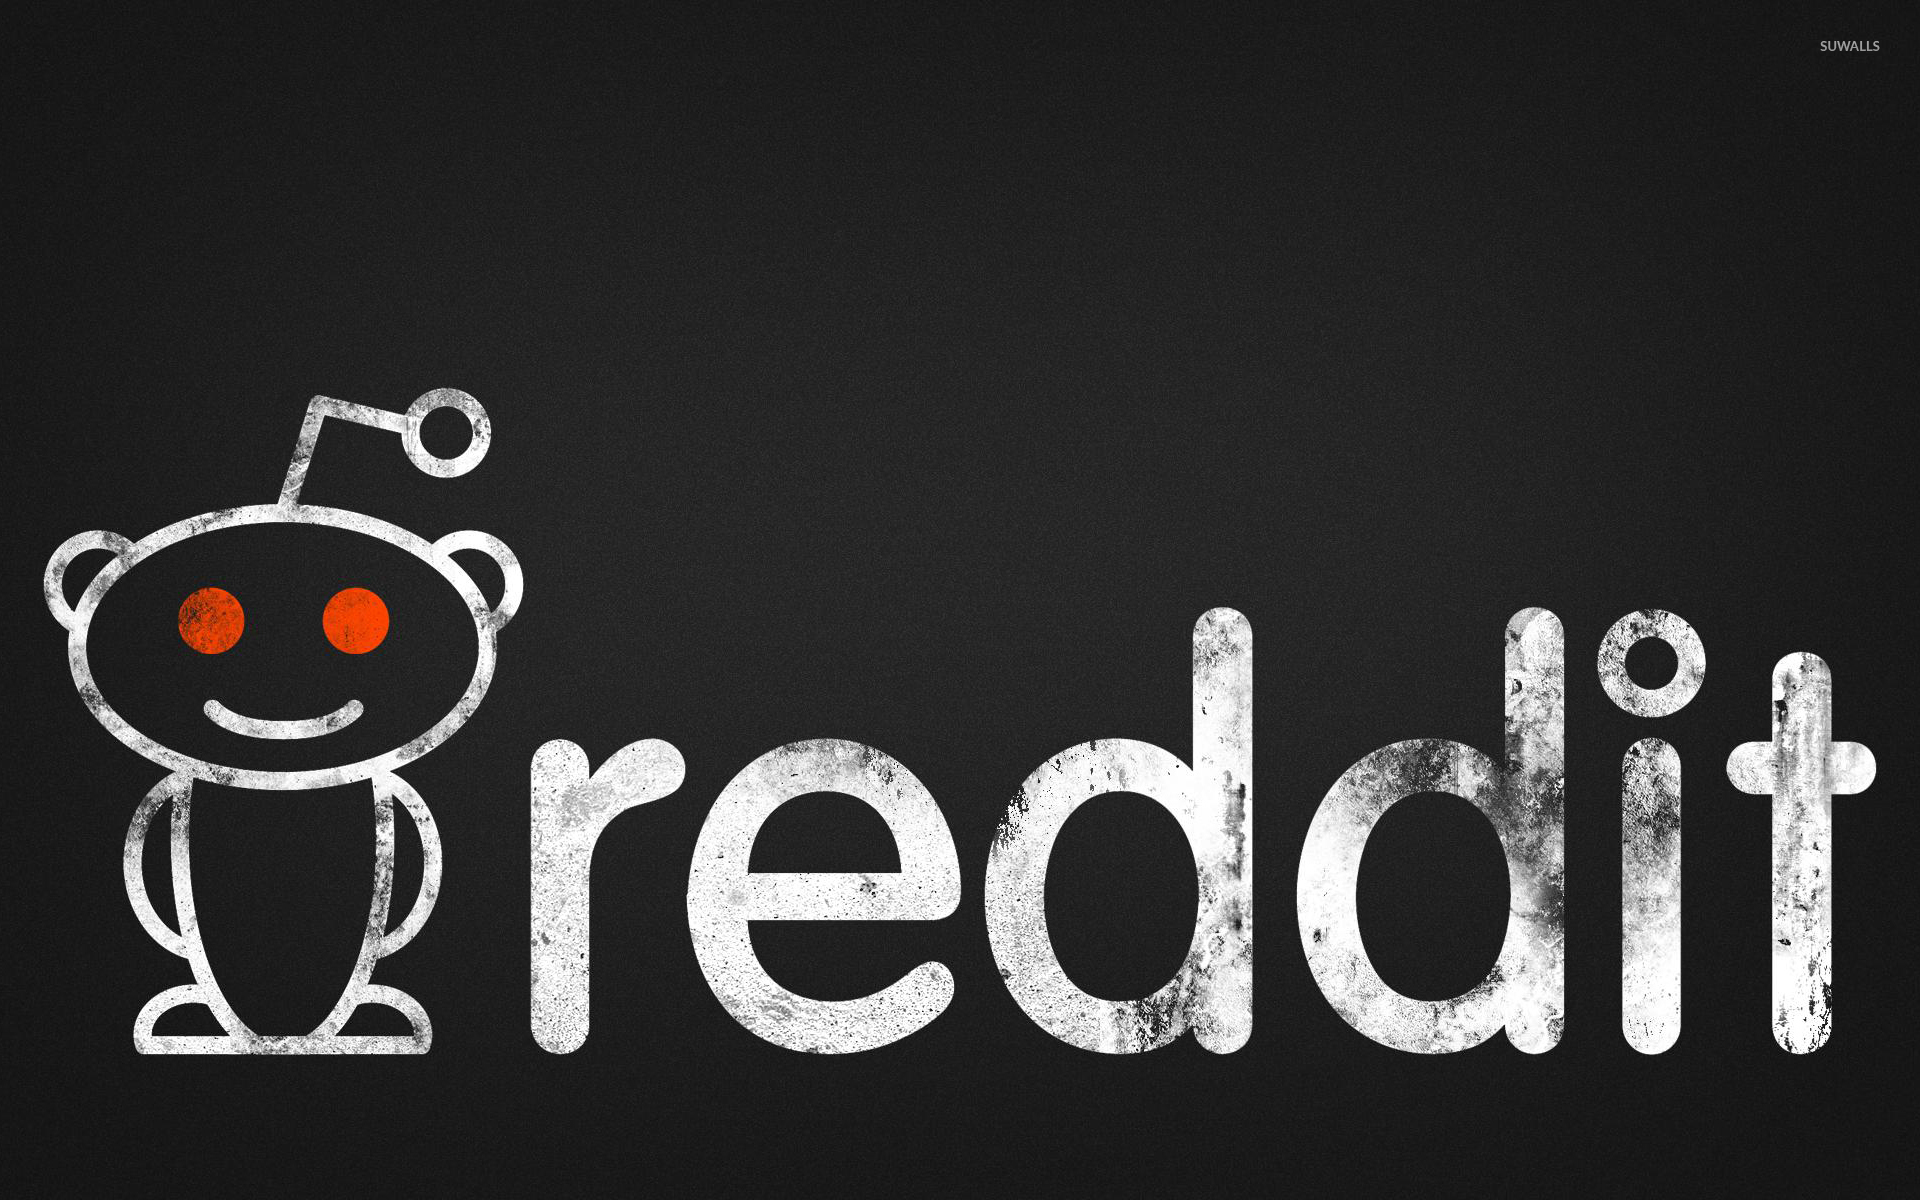 Reddit With Glowing Eyes Wallpaper Computer Wallpapers 51625